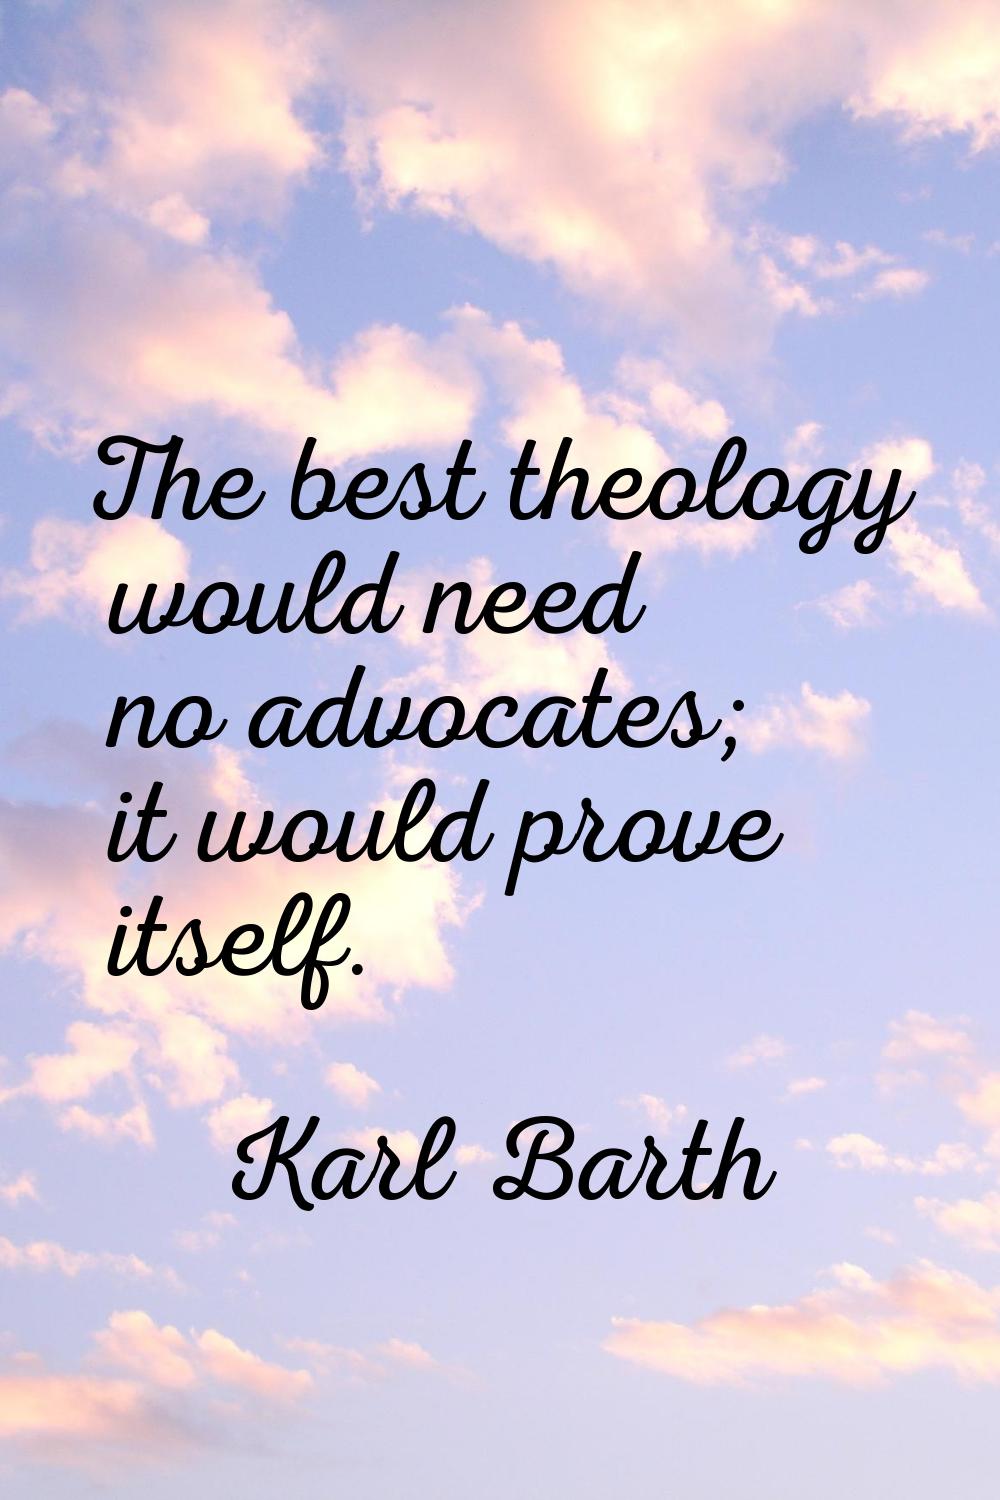 The best theology would need no advocates; it would prove itself.